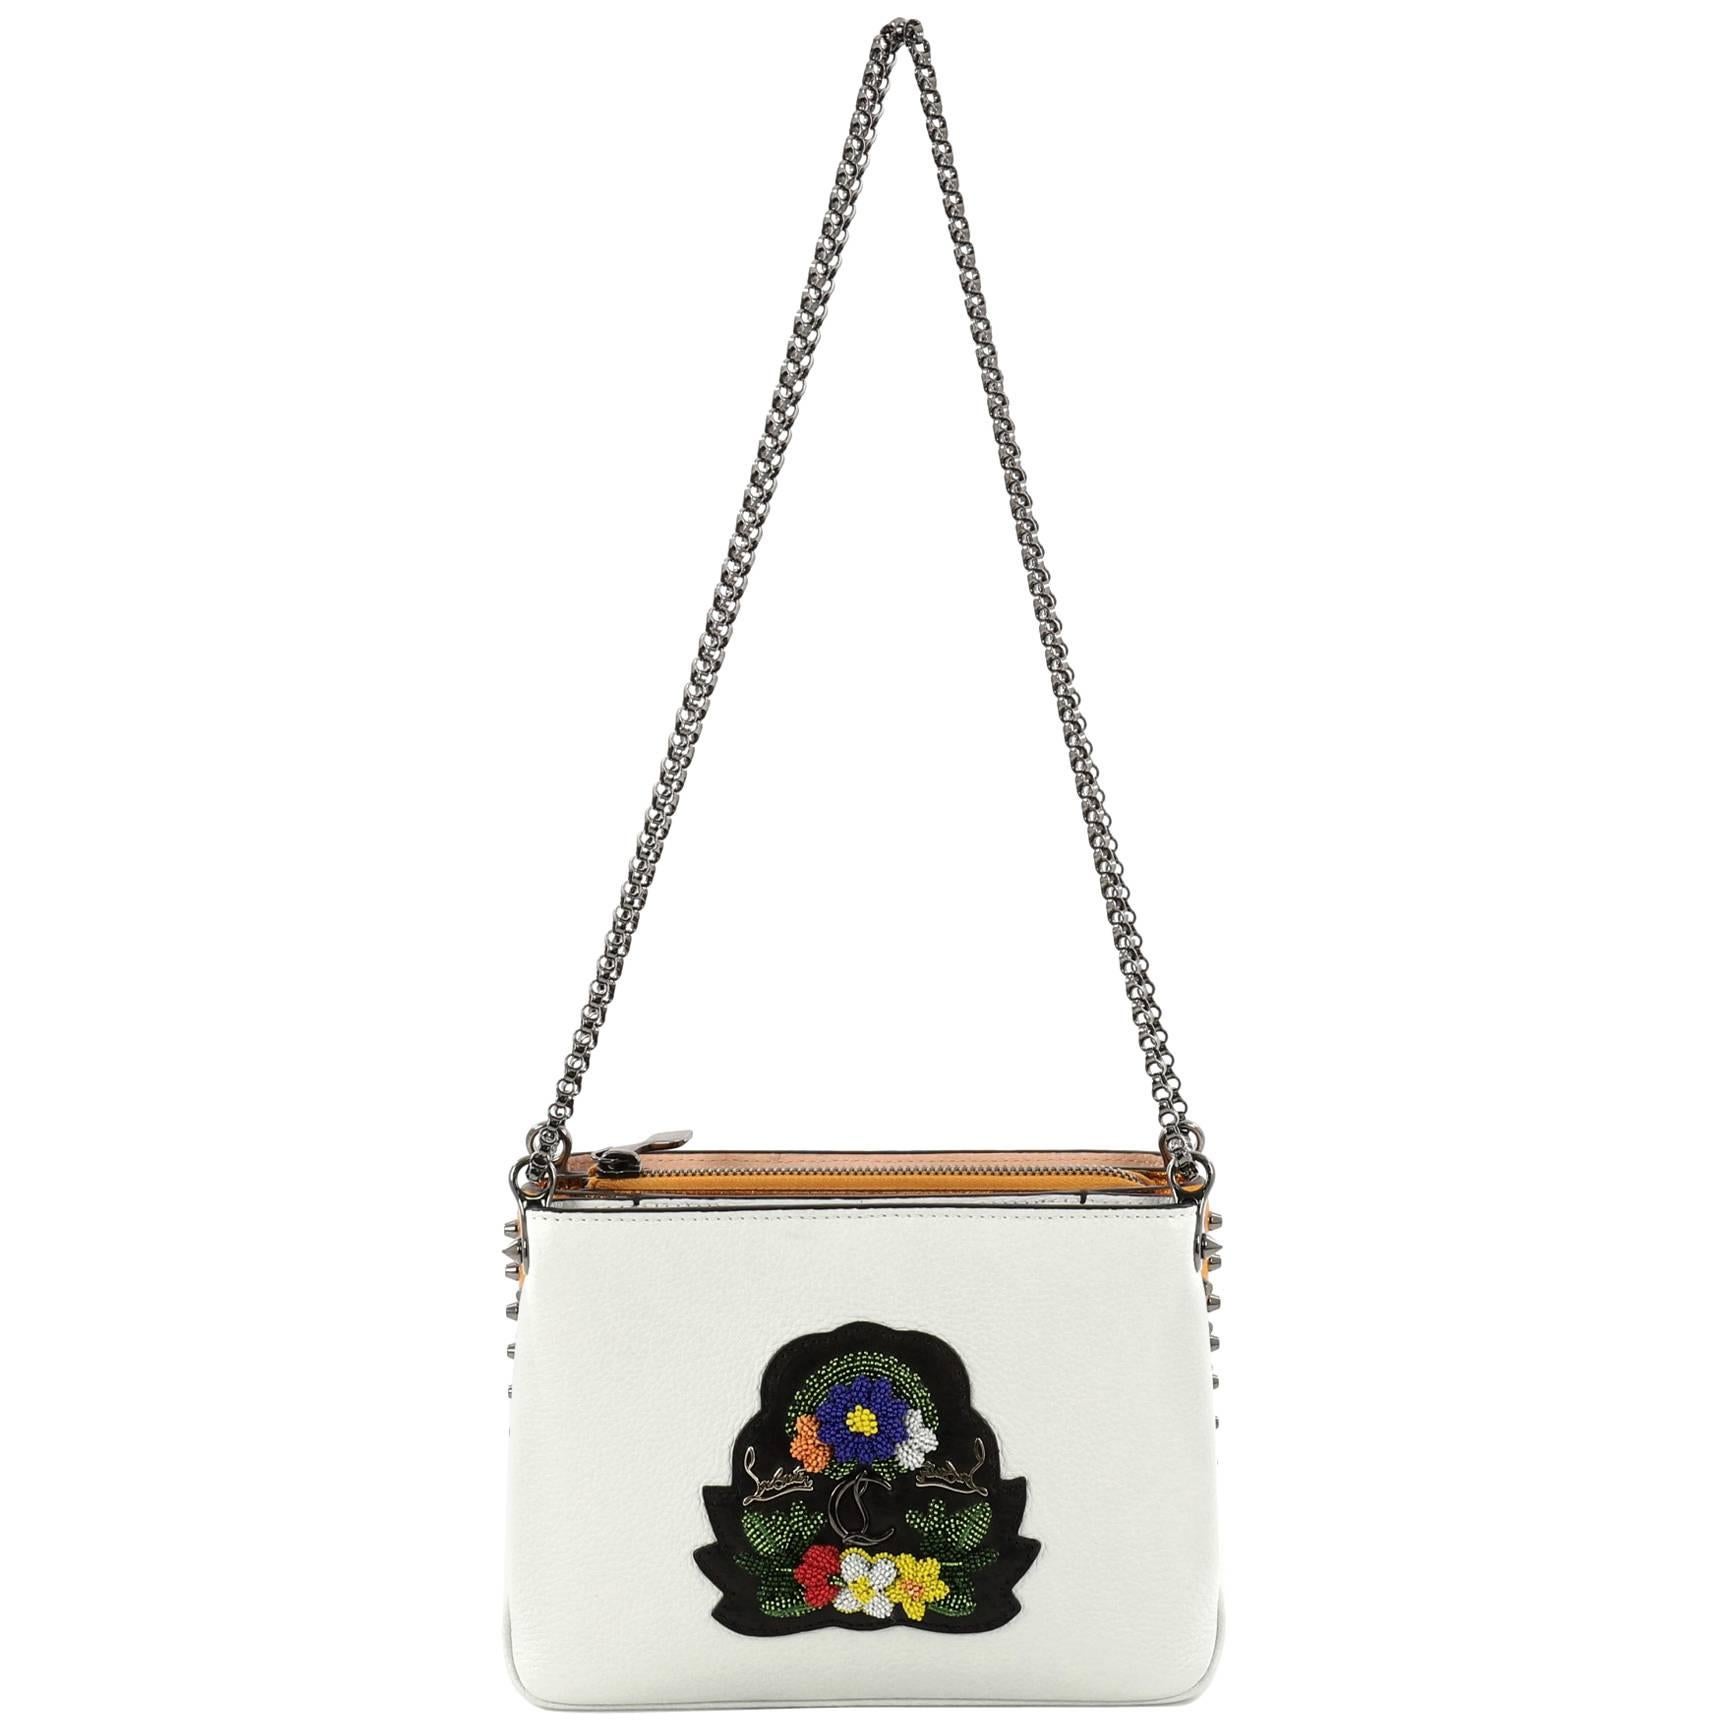 Christian Louboutin Triloubi Chain Bag Embellished Leather Small 